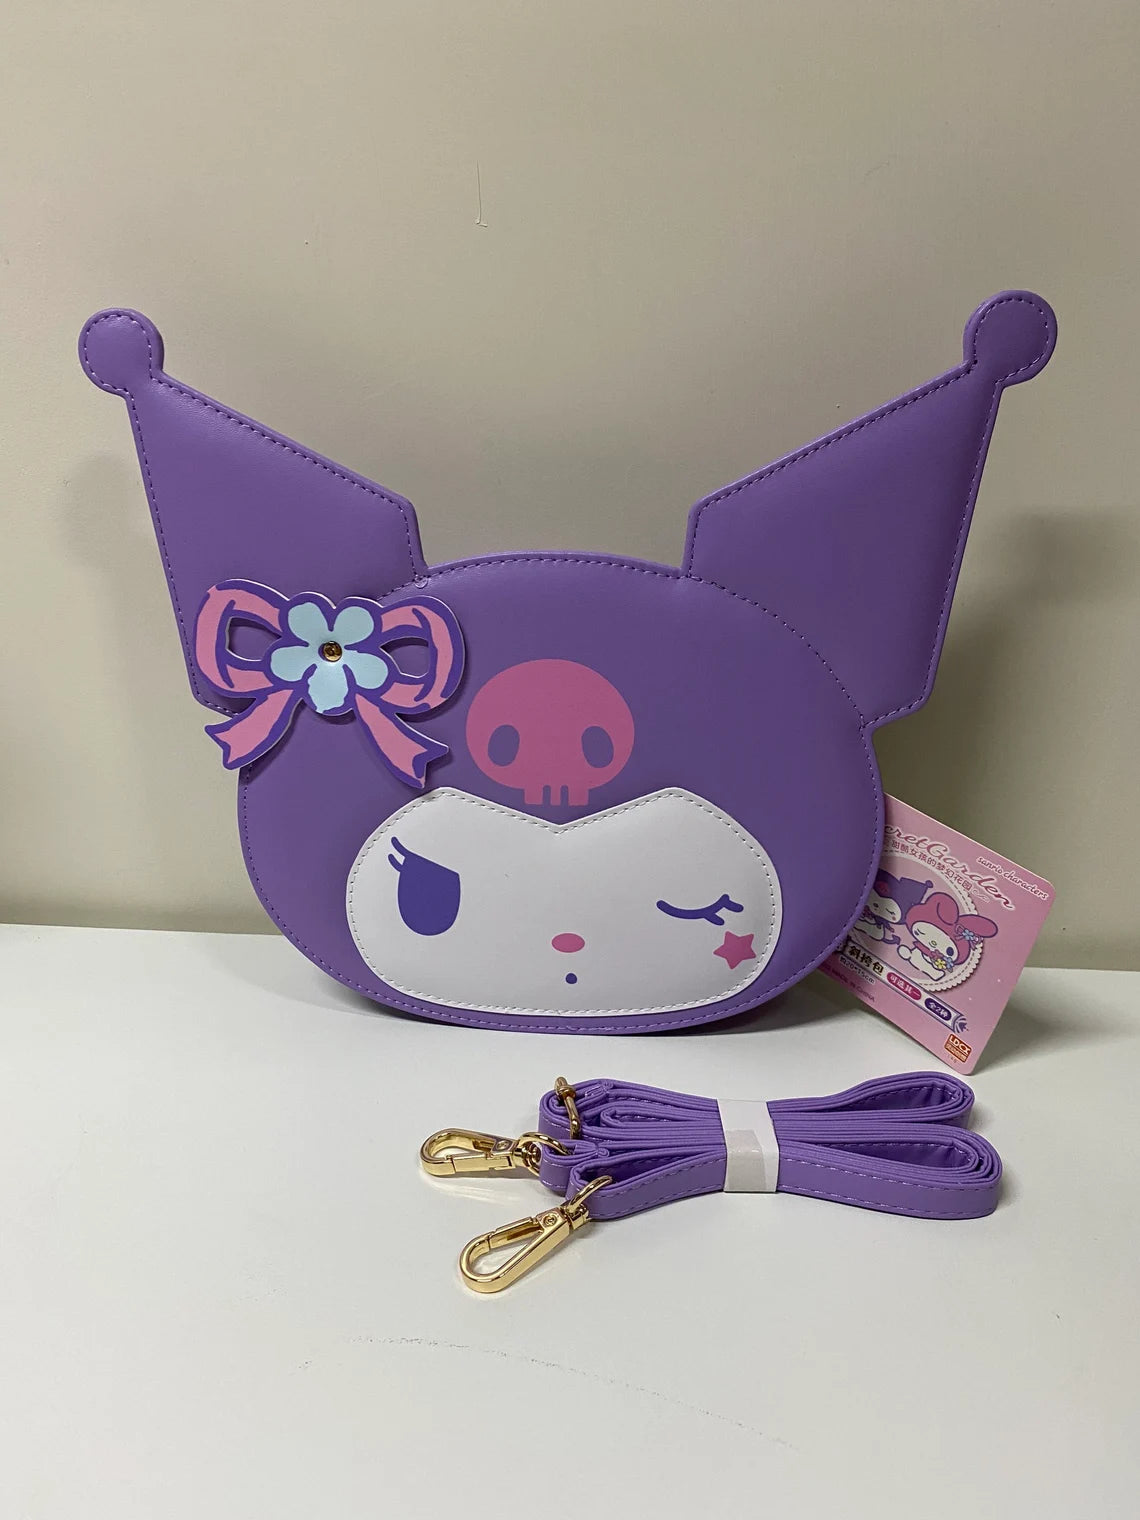  Hello Kitty and Friends Kuromi Plushie Set - Bundle with 14  Kuromi Plush Doll with Carrying Straps Plus Stickers and More